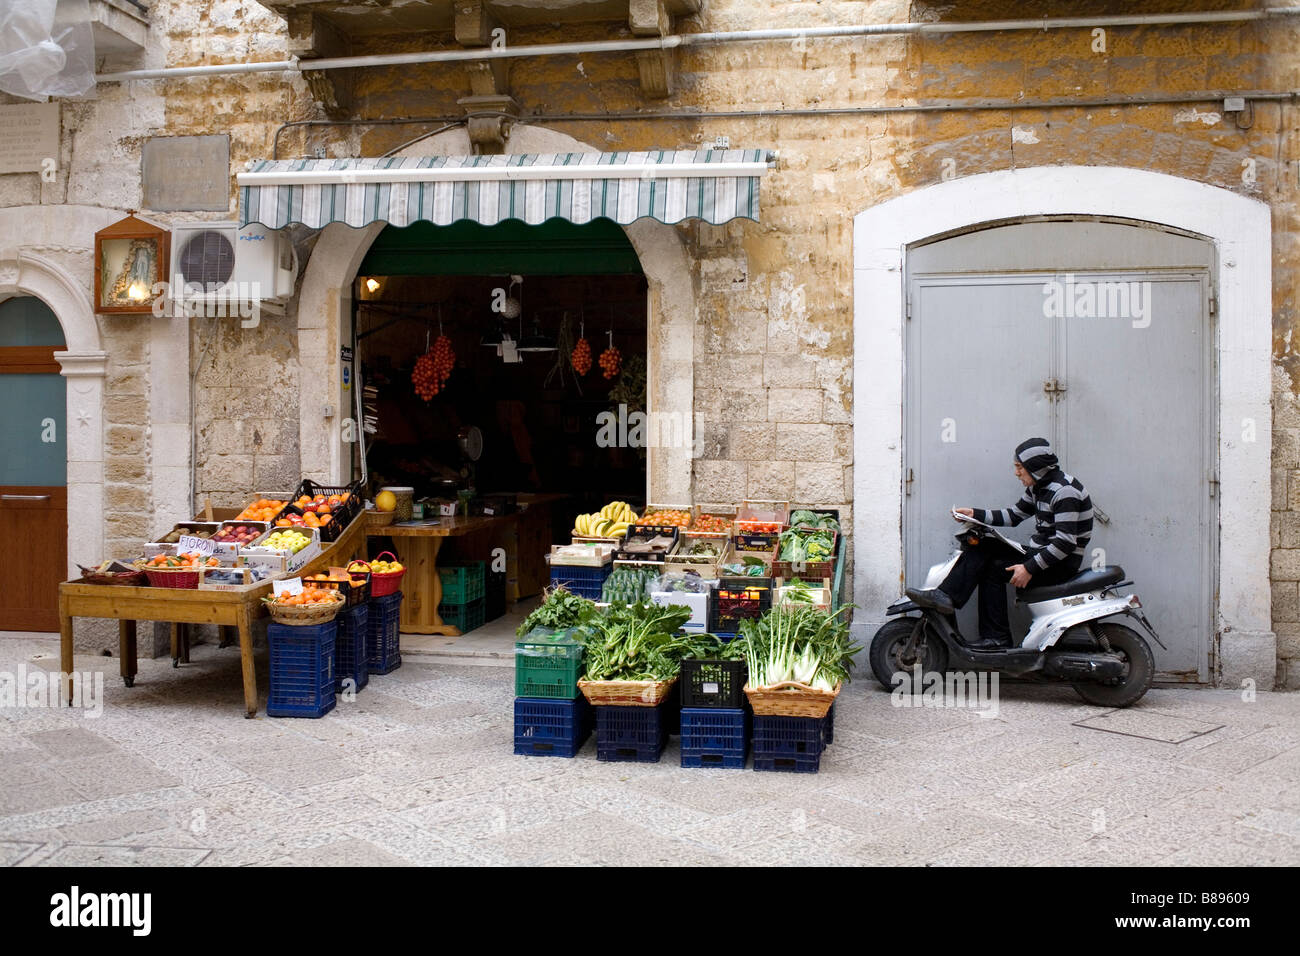 A fruit and vegetable store in Bari vecchia, southern Italy. Stock Photo